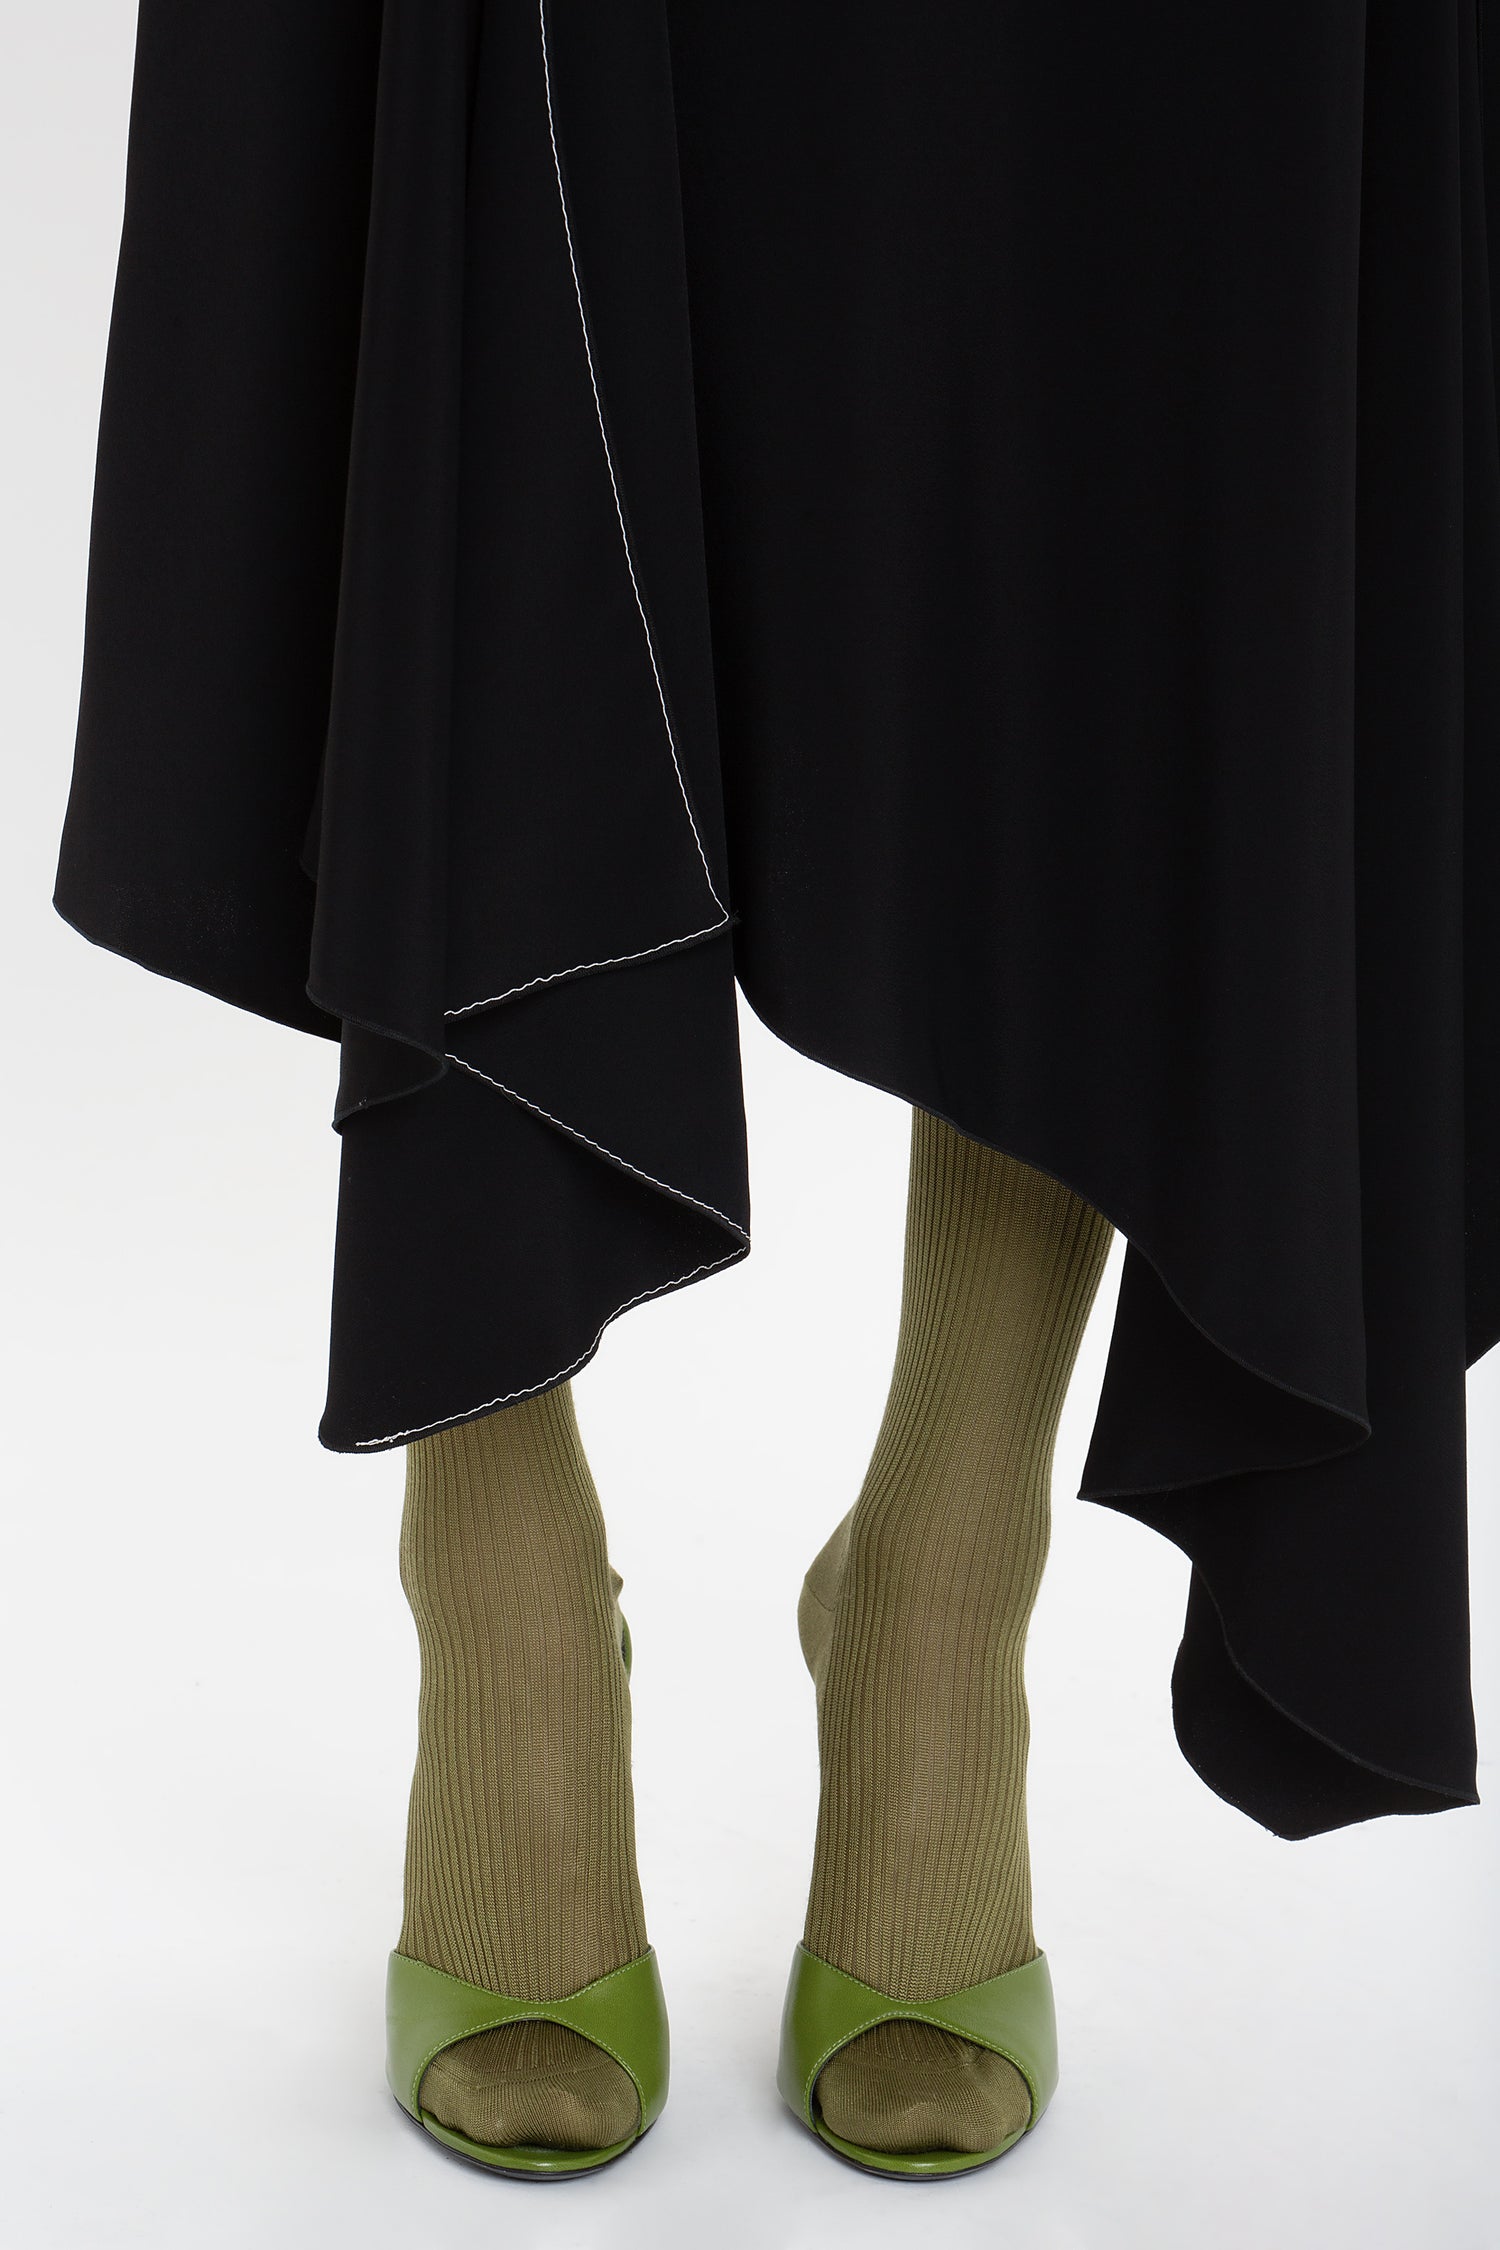 A person wearing olive green open-toed heels and ribbed olive green merino wool knit socks, with the Henley Shirt Dress In Black by Victoria Beckham cascading below the knees.